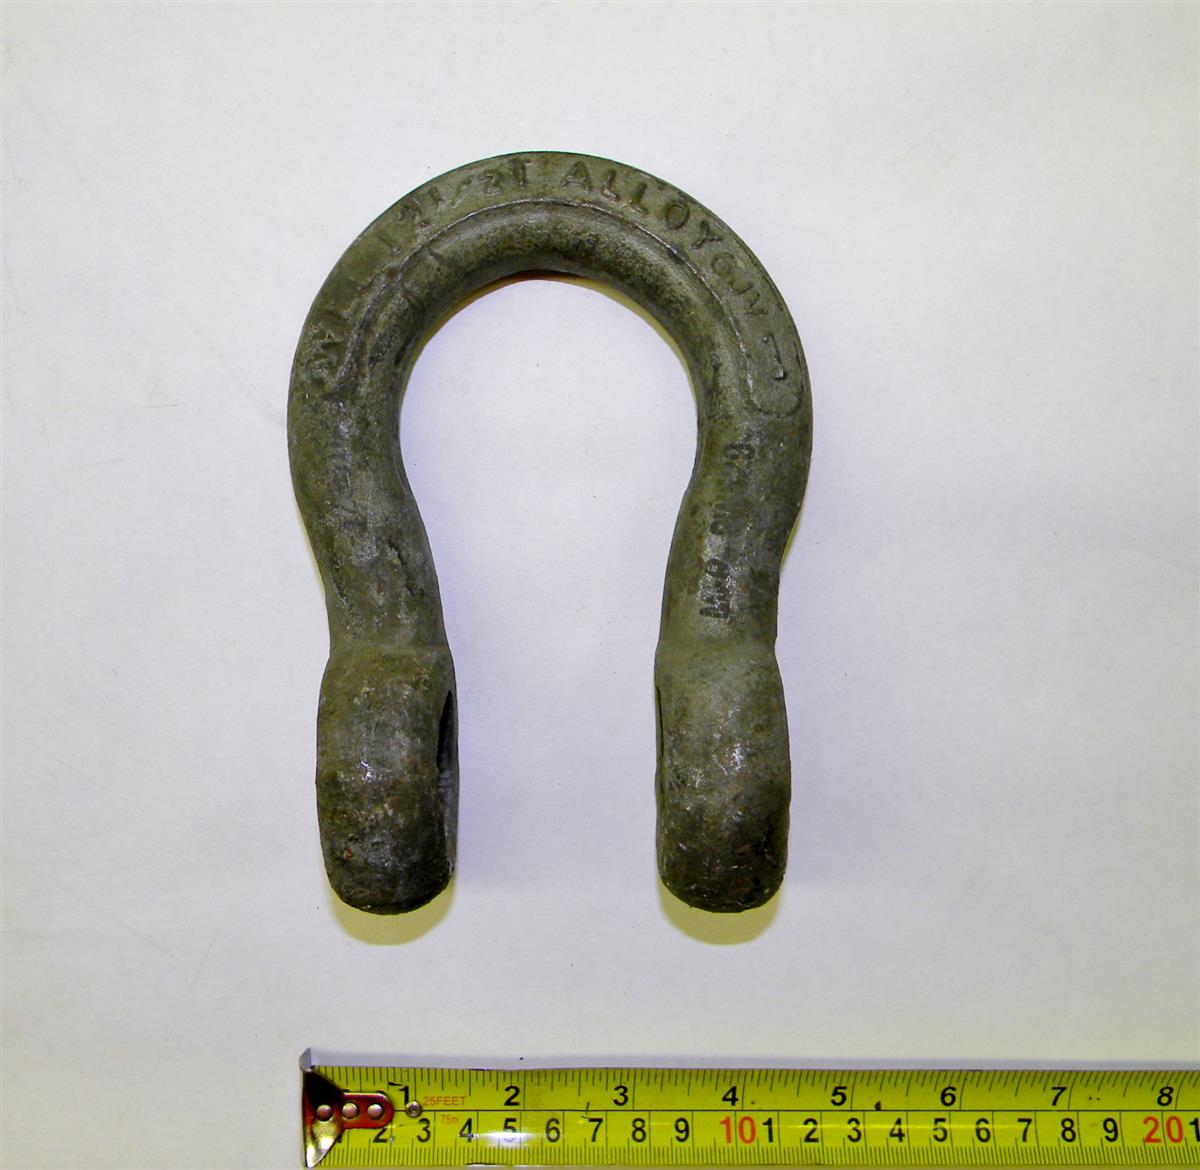 COM-5189 | Generic Steel Shackle Without Pin, COM-5189 (1).JPG